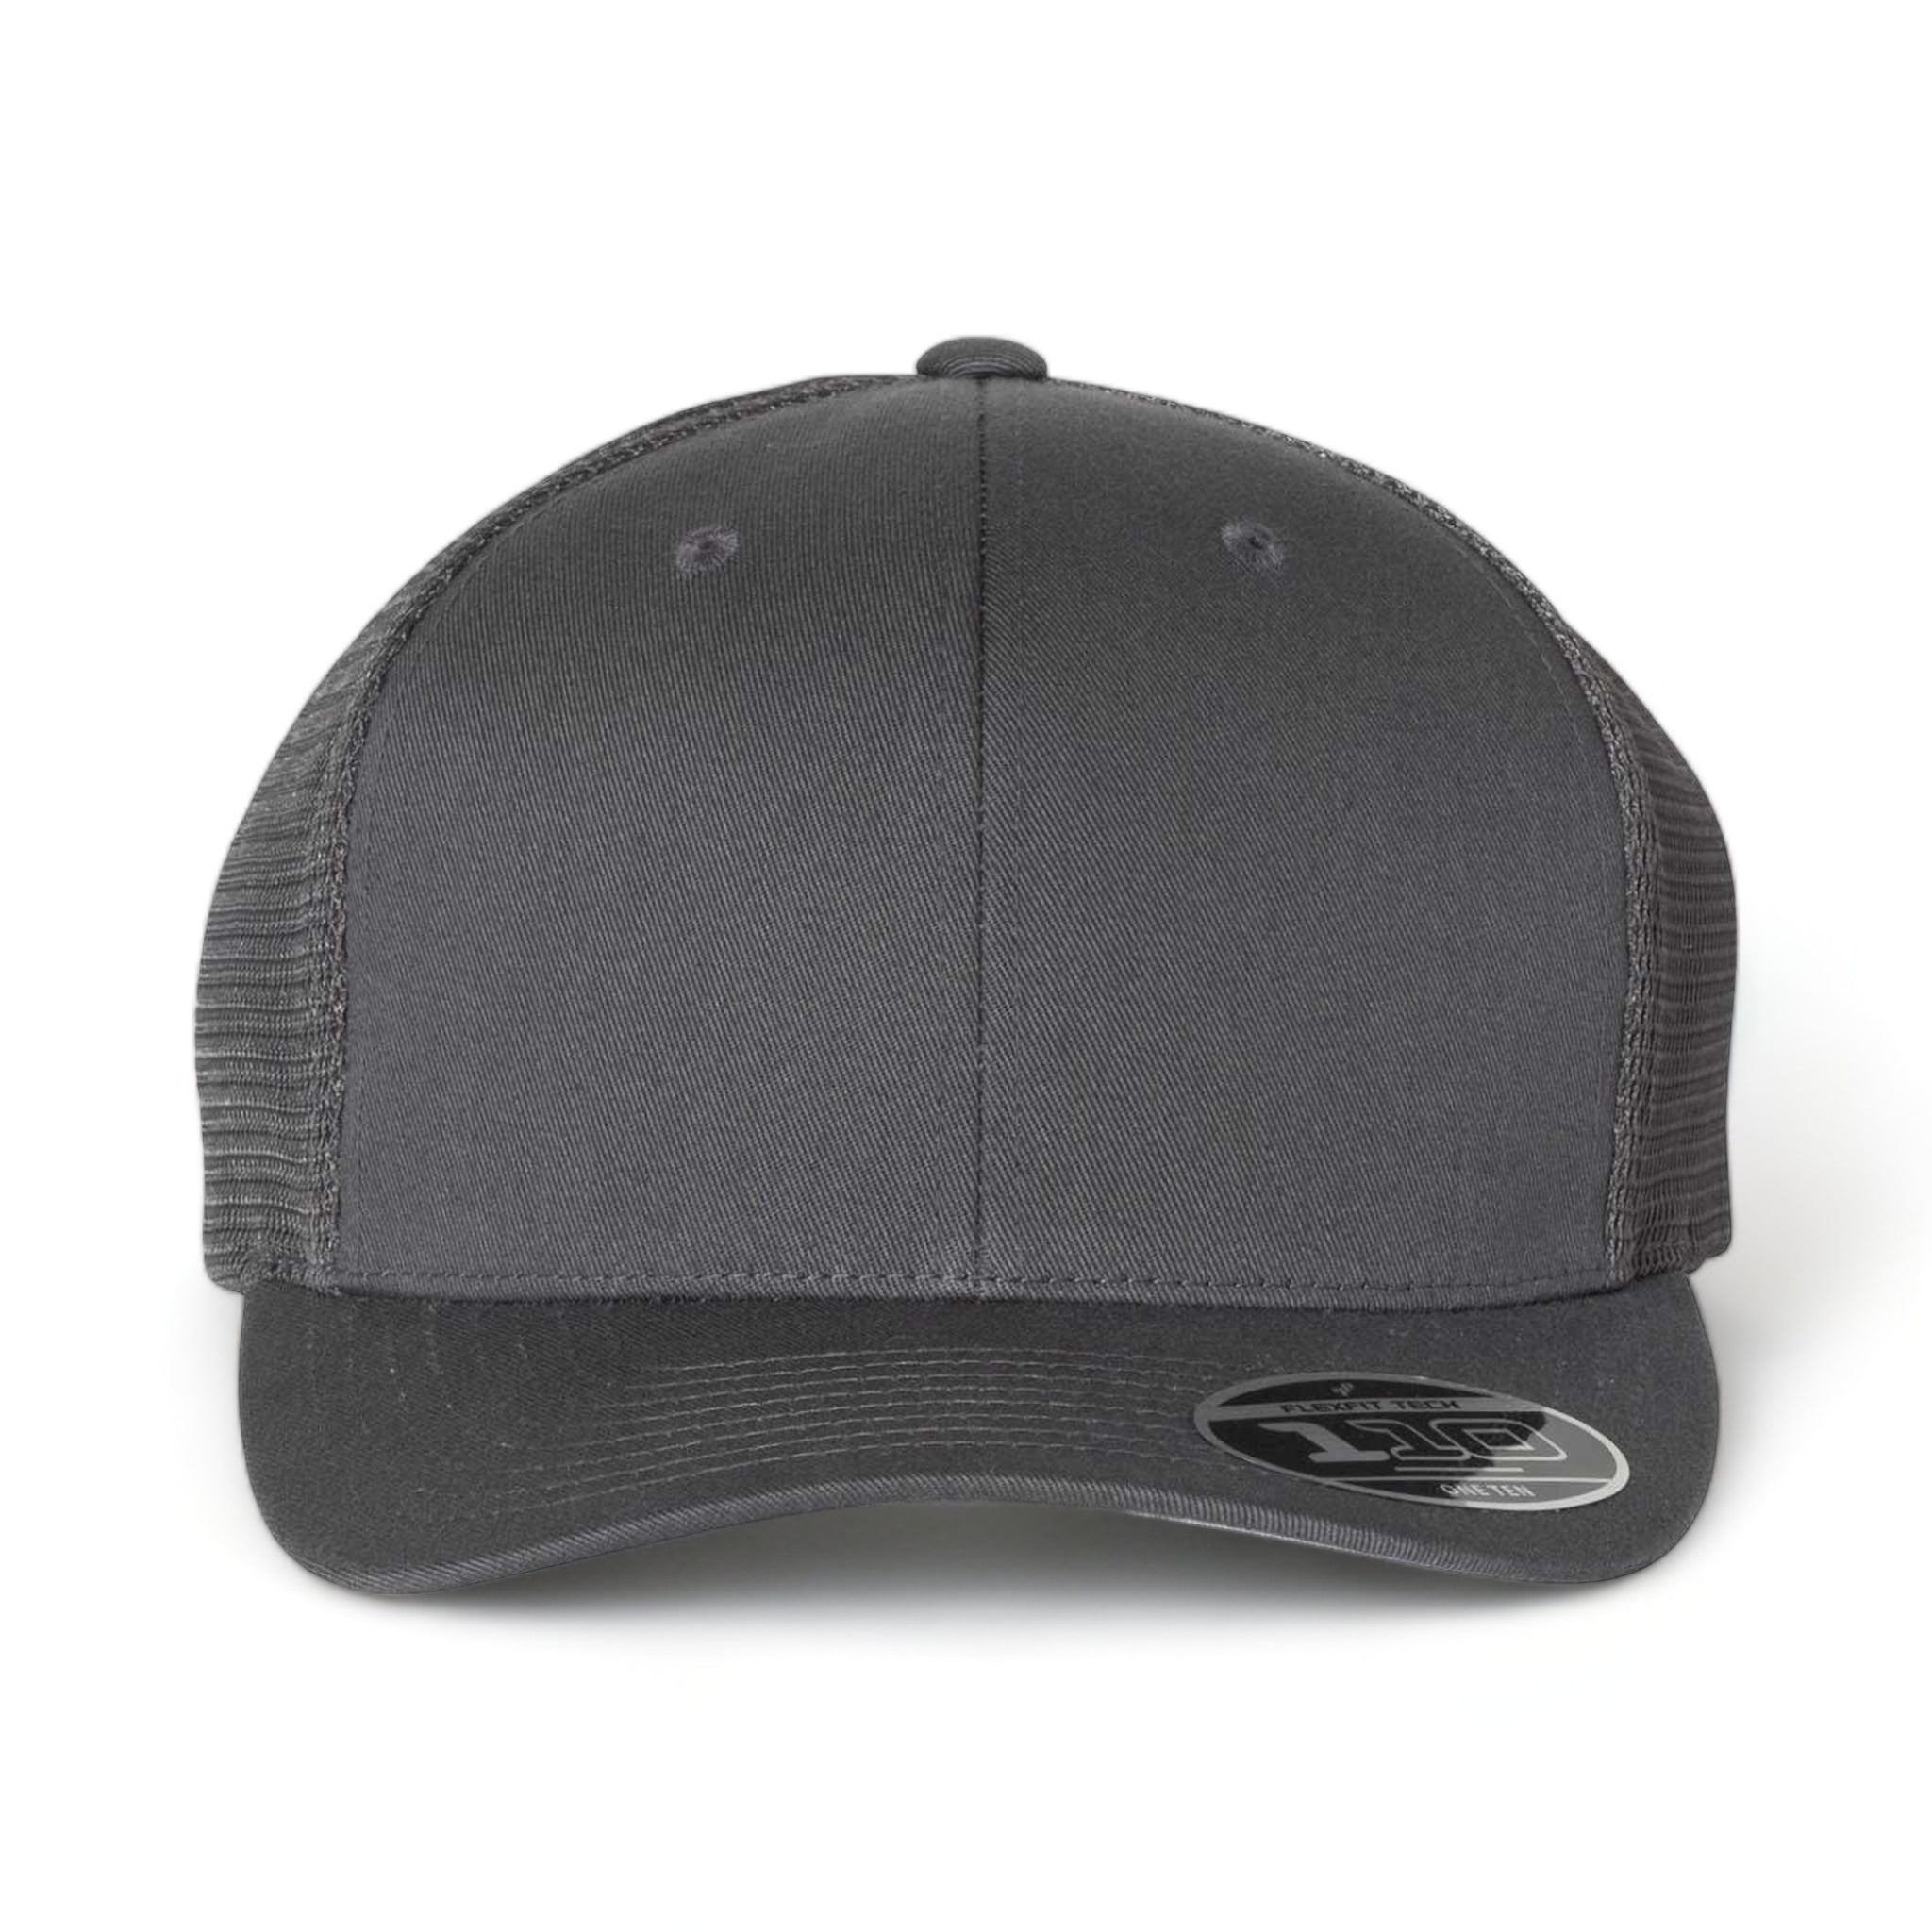 Front view of Flexfit 110M custom hat in charcoal